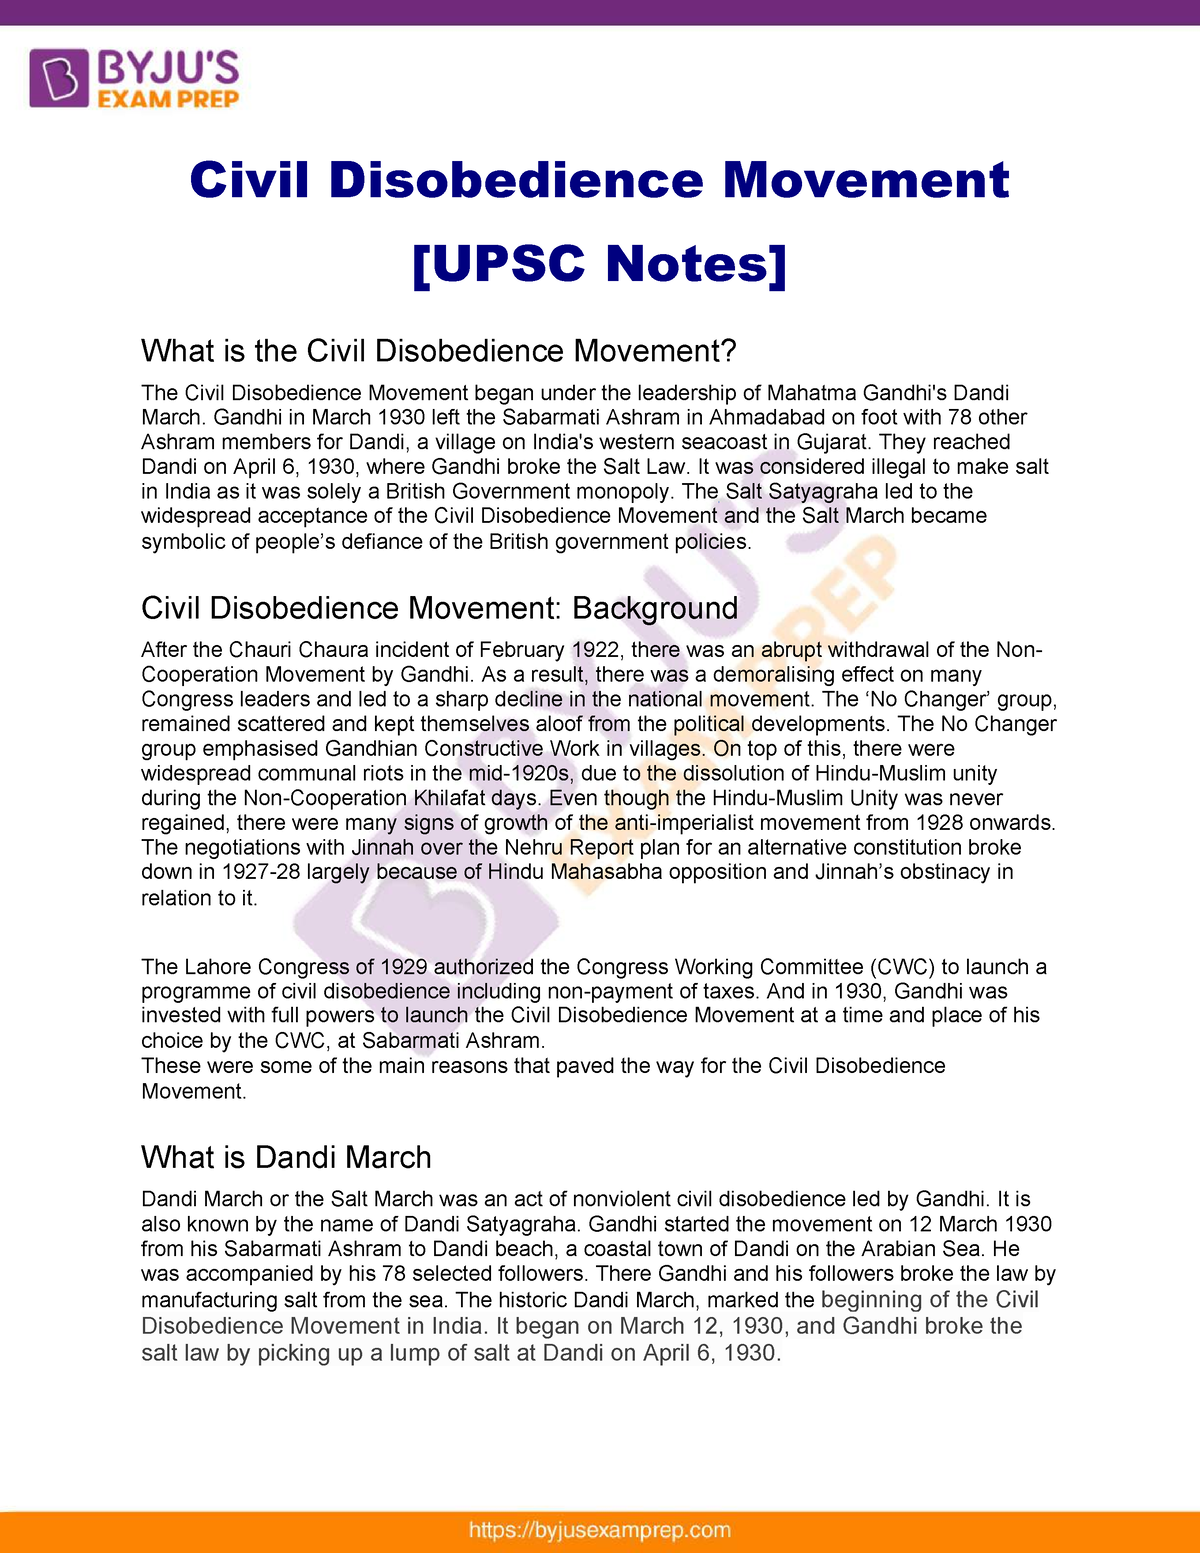 write an essay on the civil disobedience movement